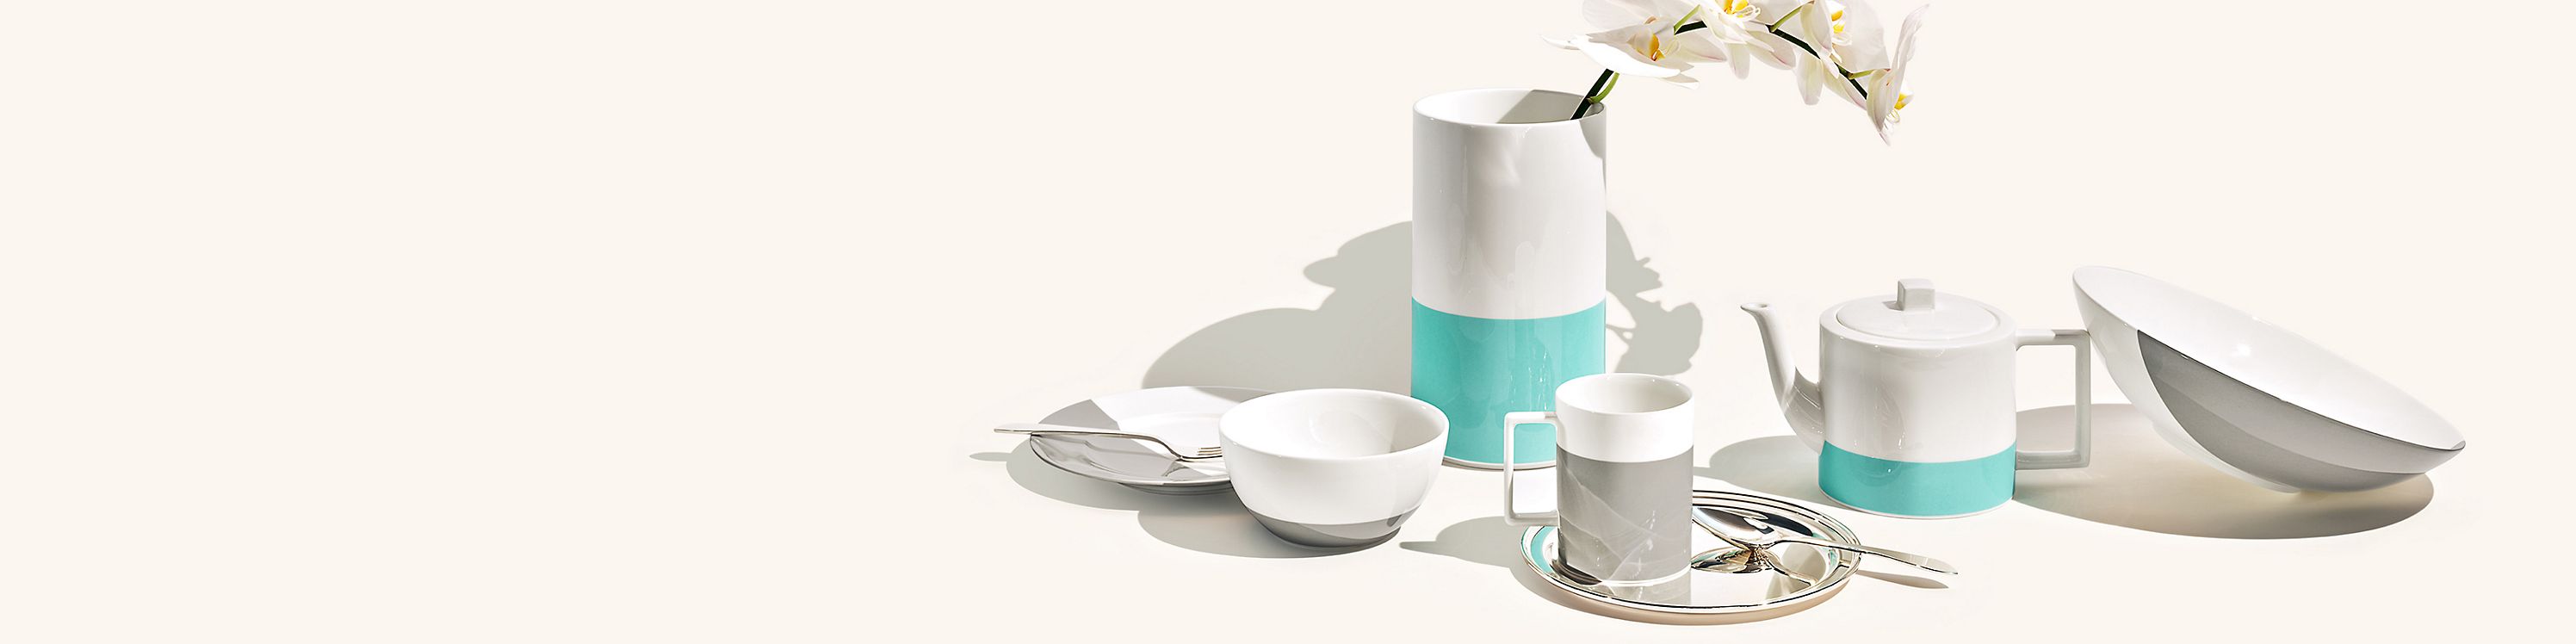 Tiffany & Co. Designs for Staying at Home